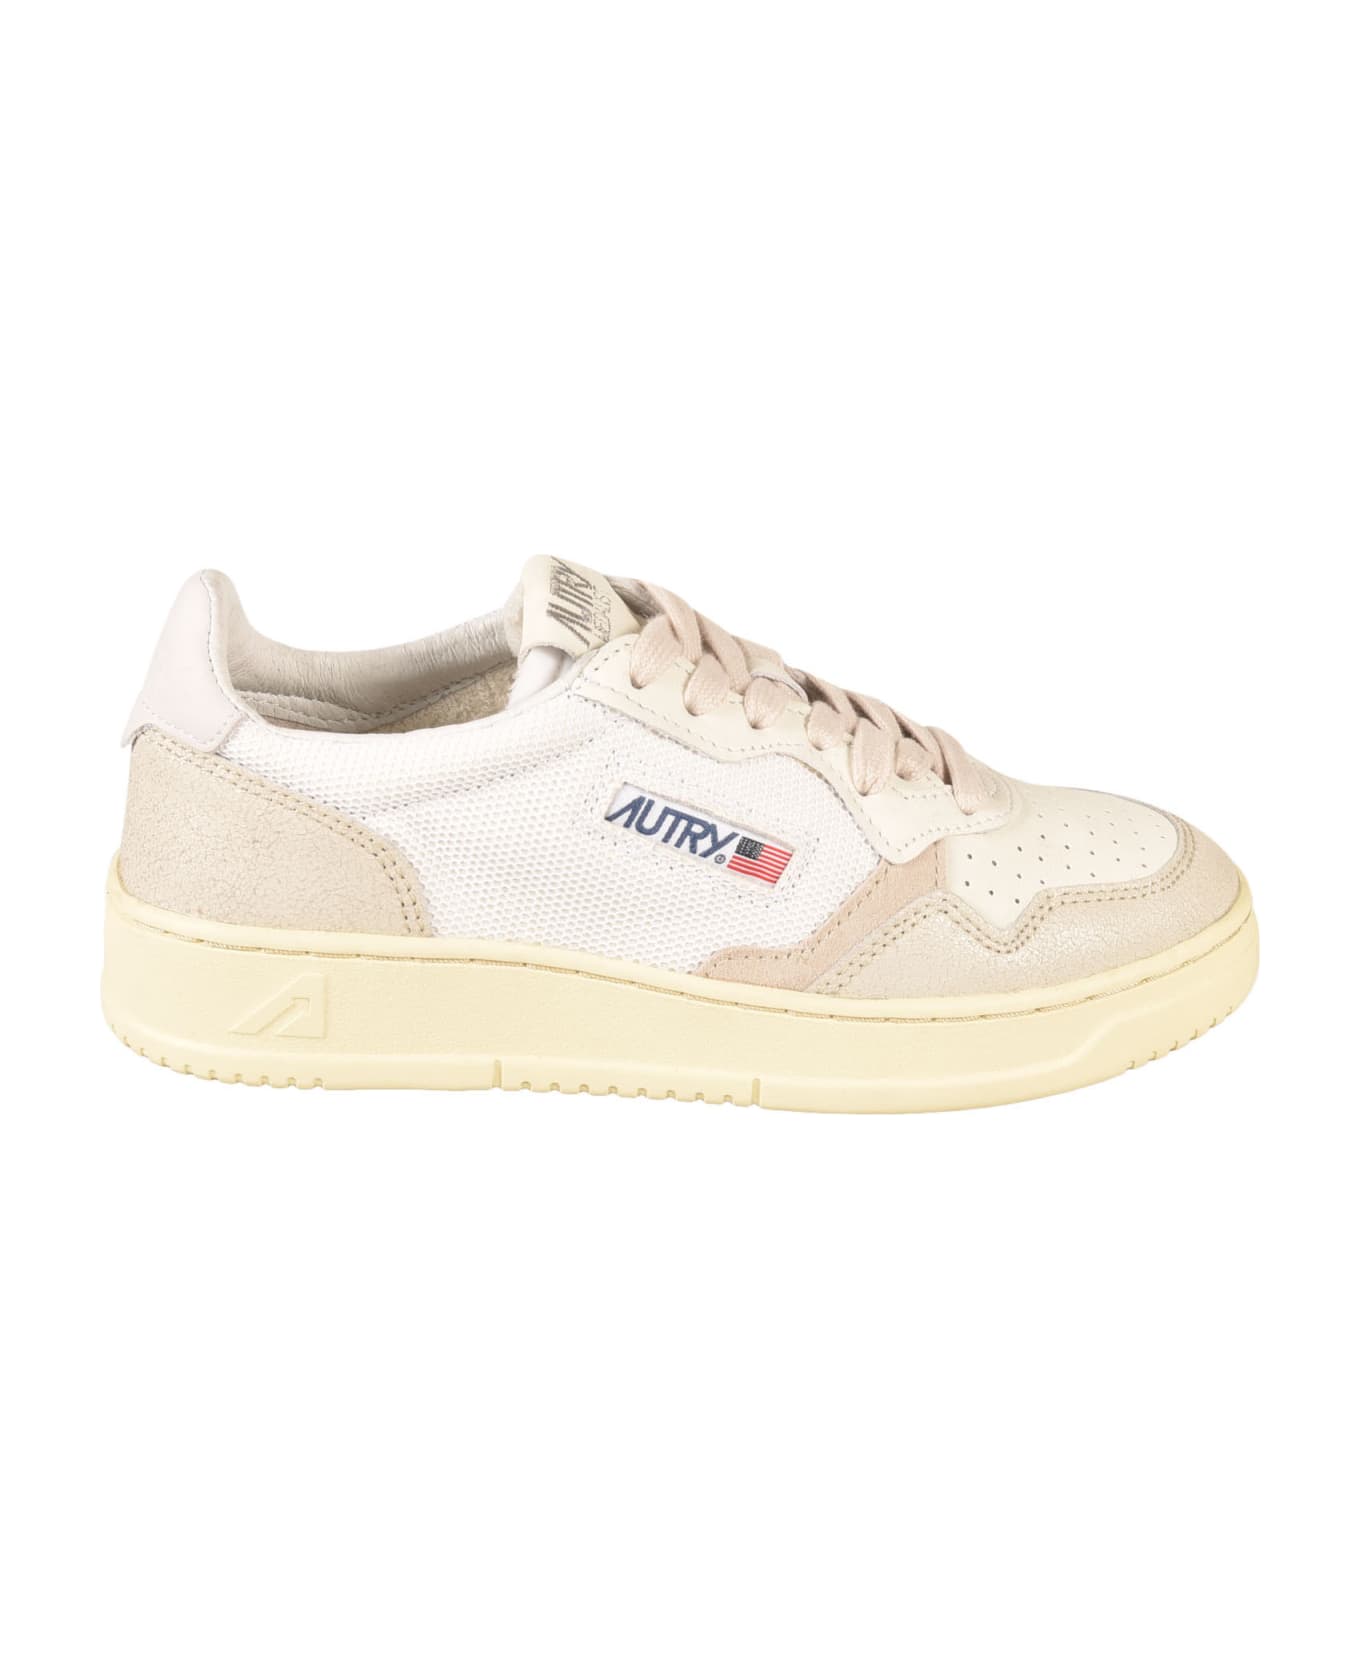 Autry Medalist Low Sneakers - Bianco スニーカー